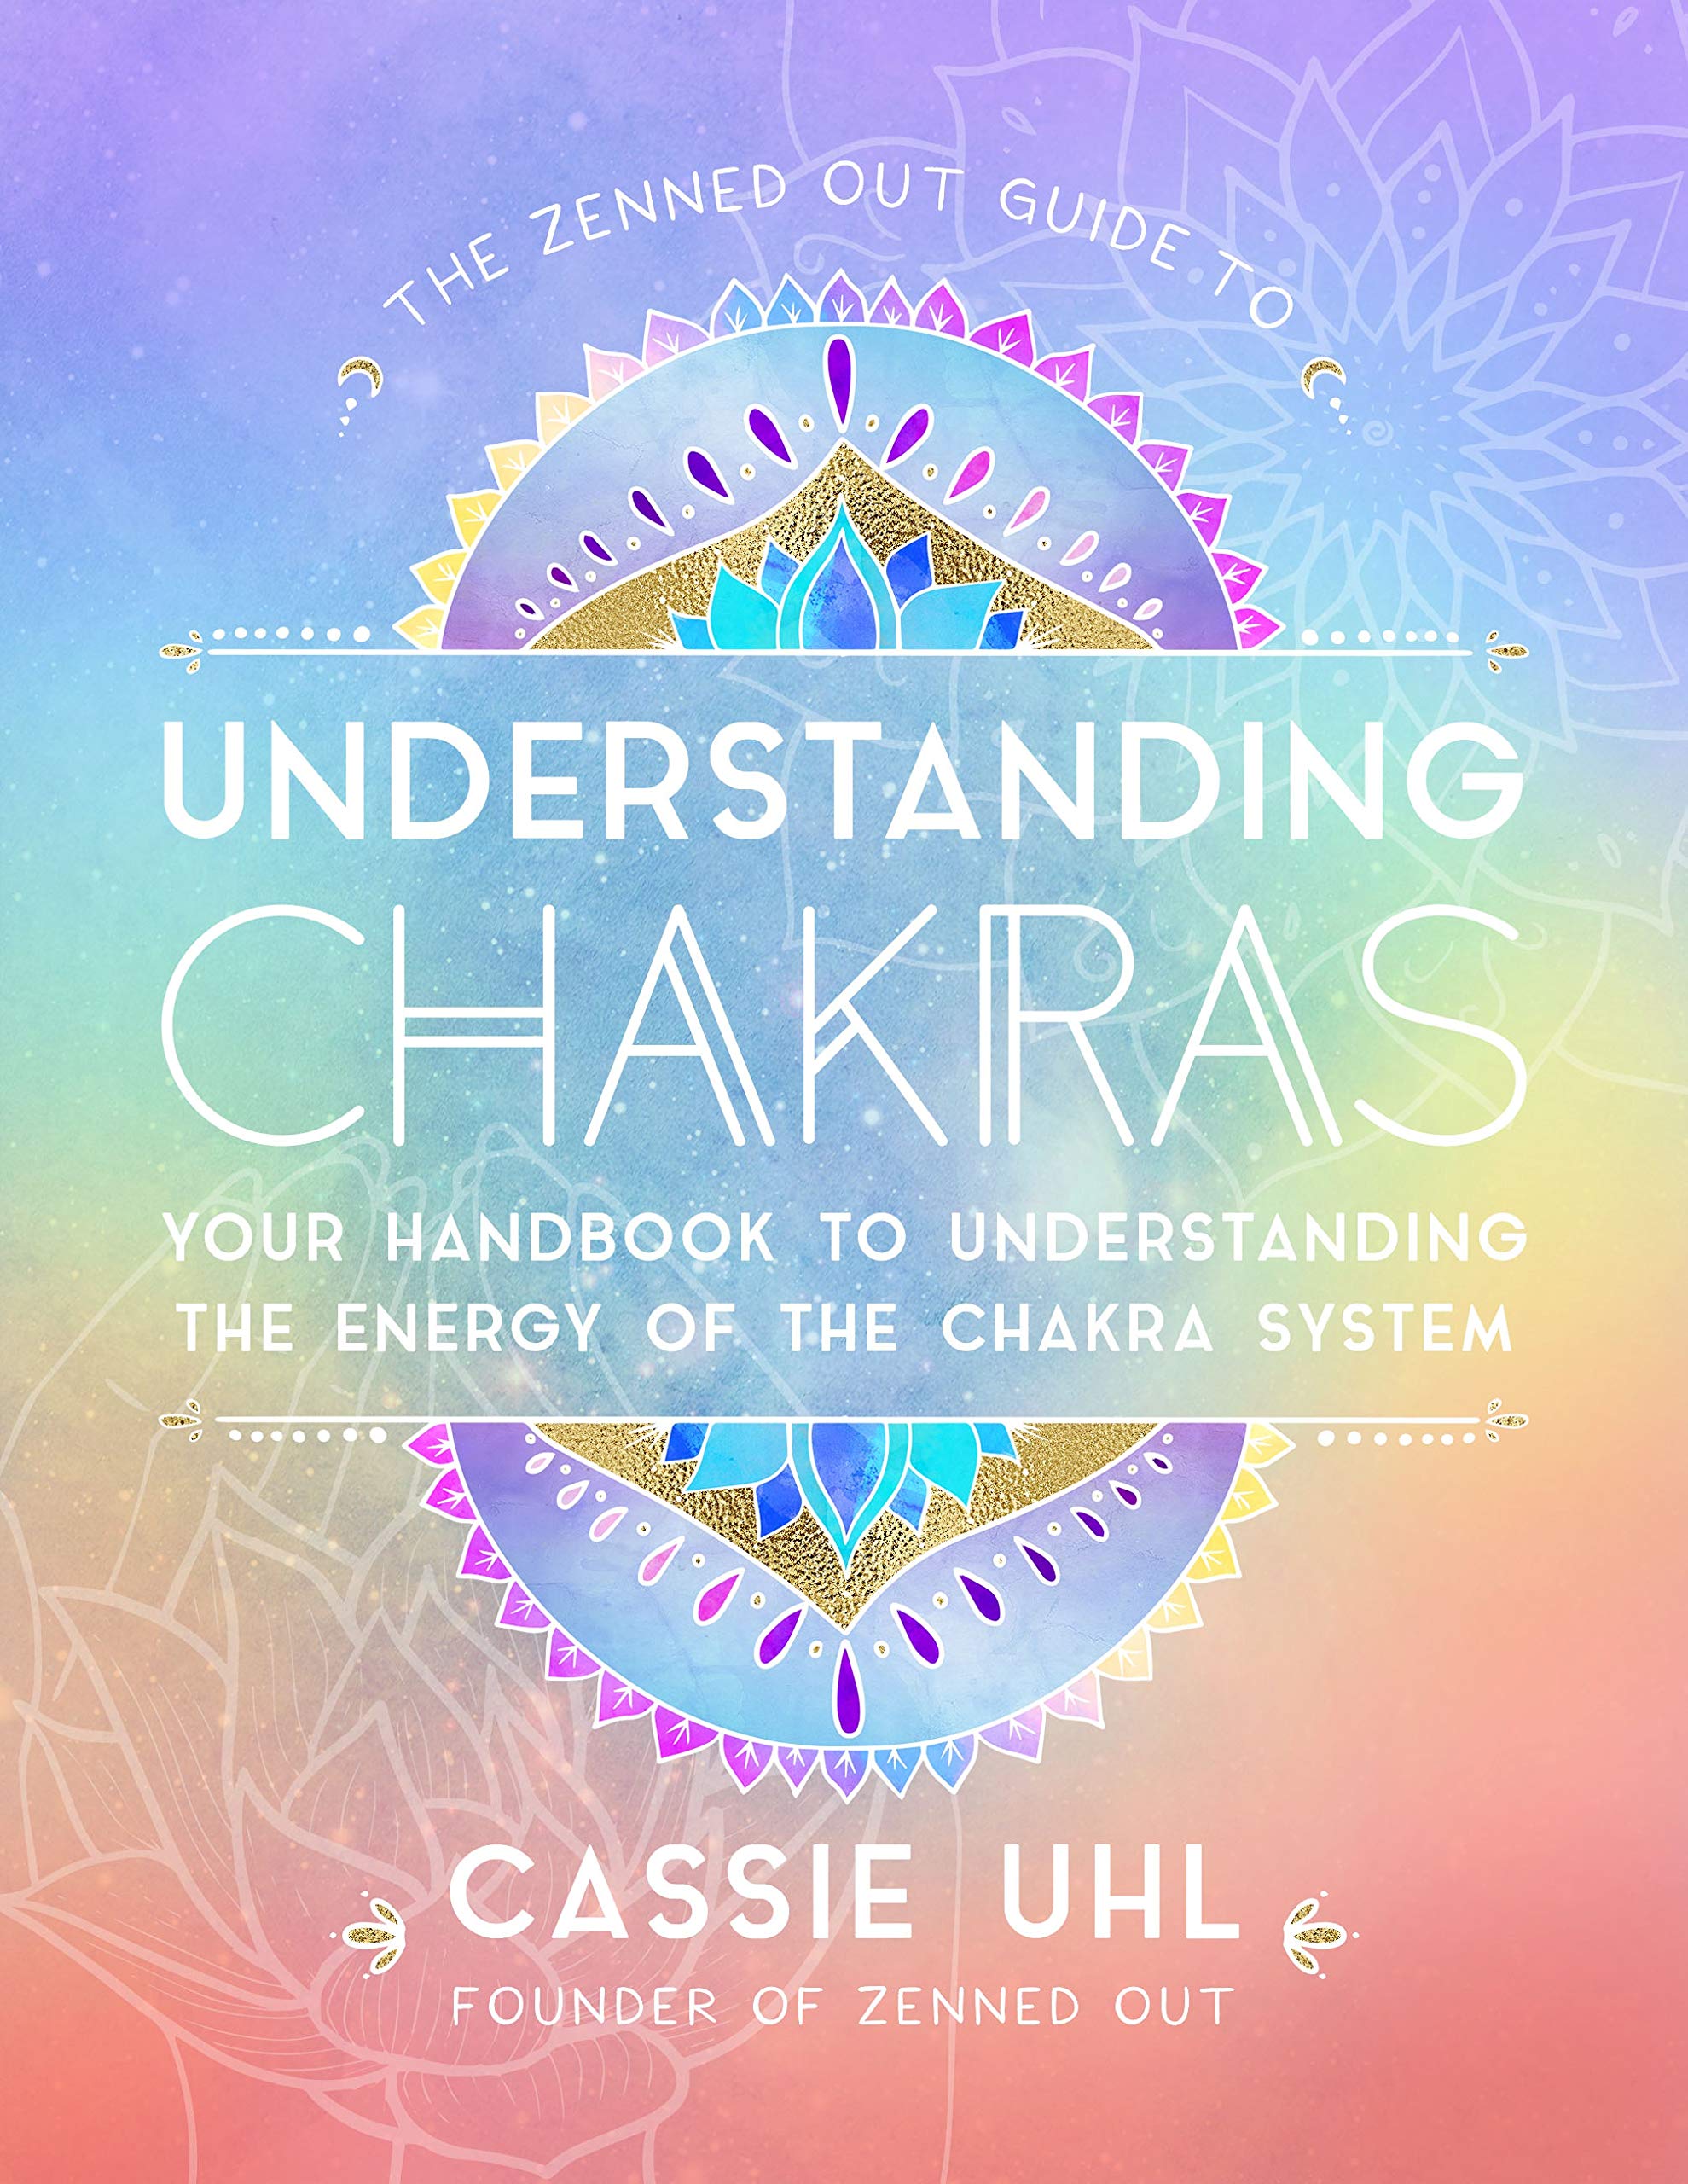 Pictures Of The Chakras